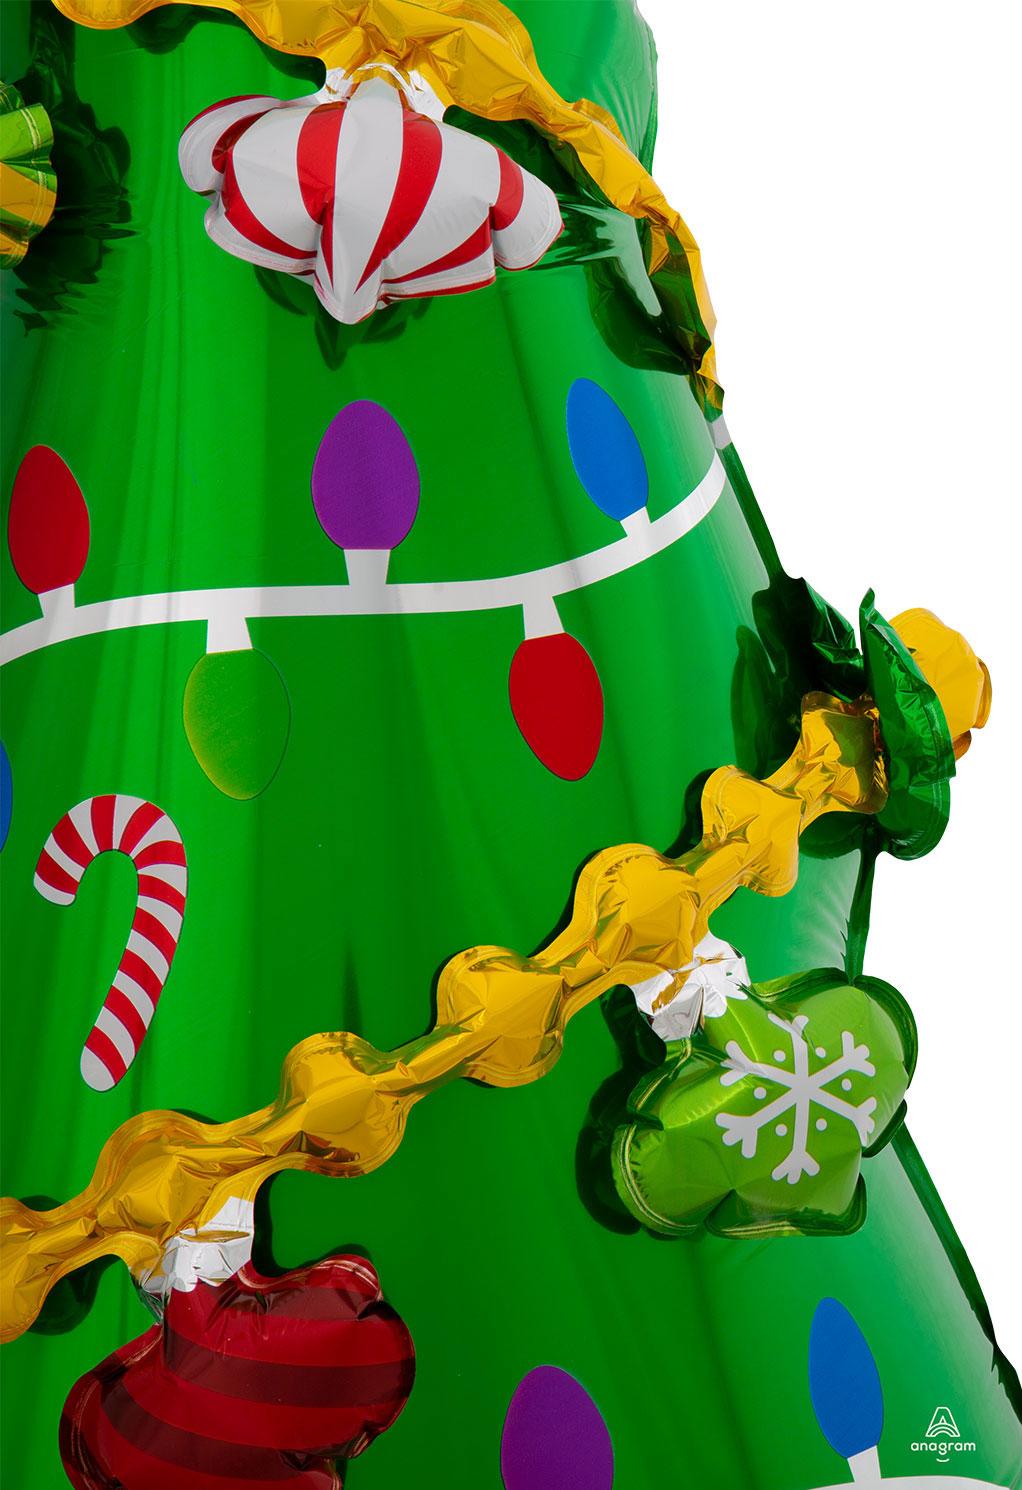 Christmas Tree Airloonz Air-Fill Character Balloon by Amscan 8311711 available here at Karnival Costumes online party shop